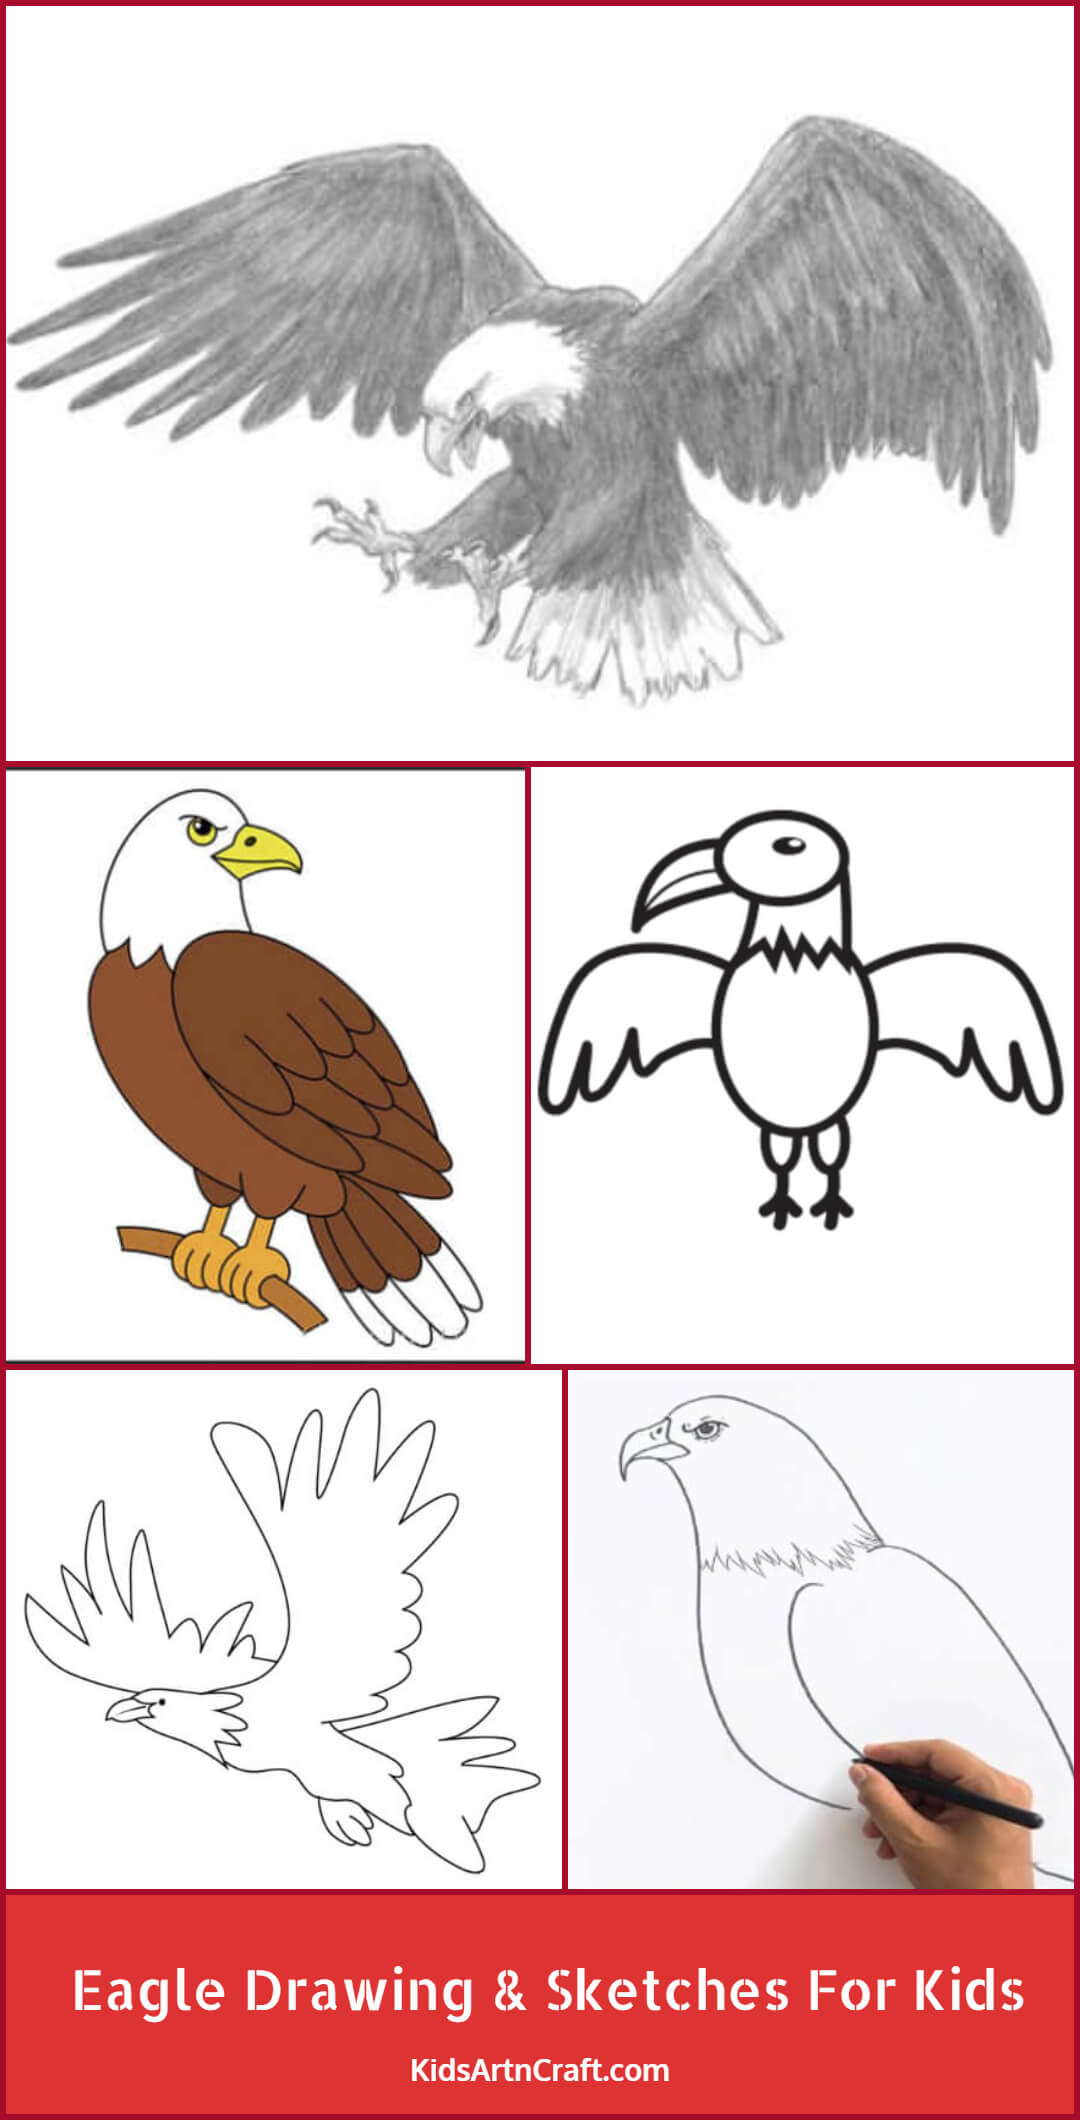 Eagle Drawing & Sketches For Kids